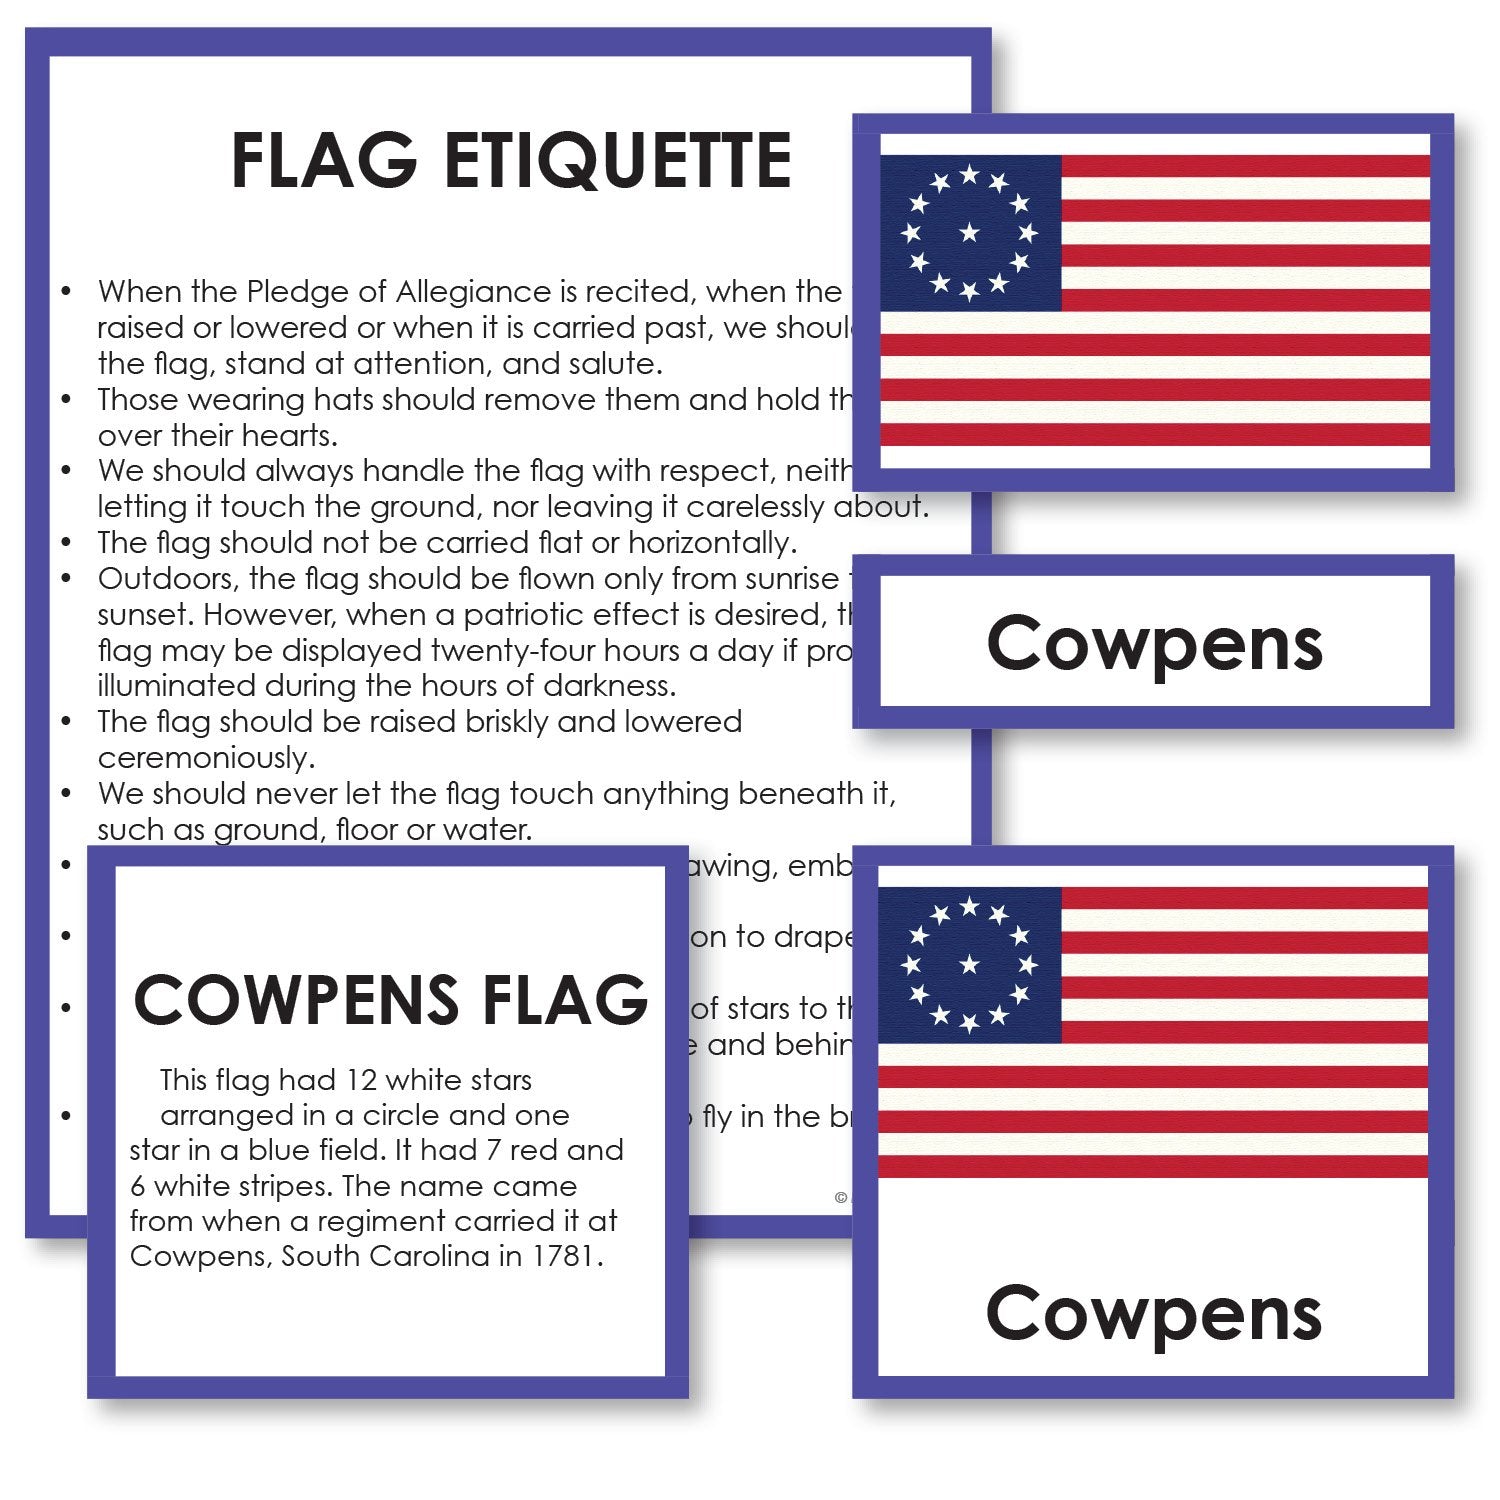 Geography Material-Flags, Maps & Globes - Historical Flags Of The United States 3-Part Cards With Descriptions